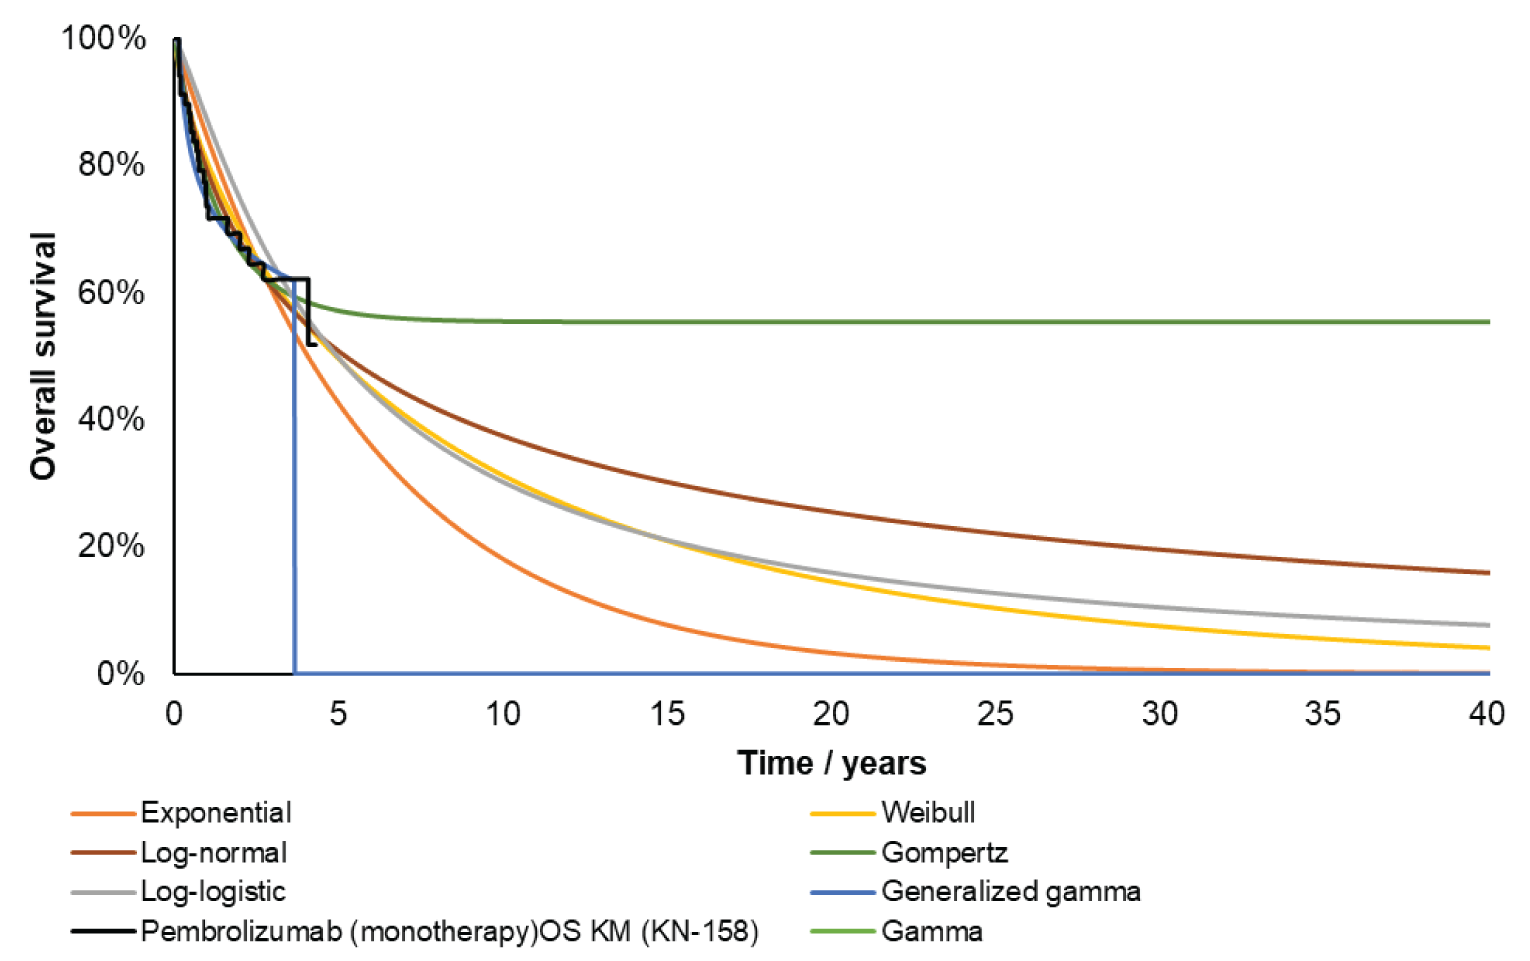 A Kaplan-Meier survival curve with the Y-axis labelled “overall survival” ranging from 0% to 100%, and the X-axis labelled “time in years” ranging from 0 to 40. The observed survival from the KN-158 study ends around year 4 (approximately 60% of participants surviving), with 7 parametric survival functions overlaid extending to year 10. All 7 parametric functions appear to overestimate survival until year 3, with exponential being the highest and Gompertz being the lowest. After that point, the parametric functions separate even more notably, with Gompertz estimating the highest long-term survival (approximately 55% at year 40) and exponential estimating the lowest (approximately 0% by year 30). The generalized gamma distribution drops abruptly to 0% around year 4.